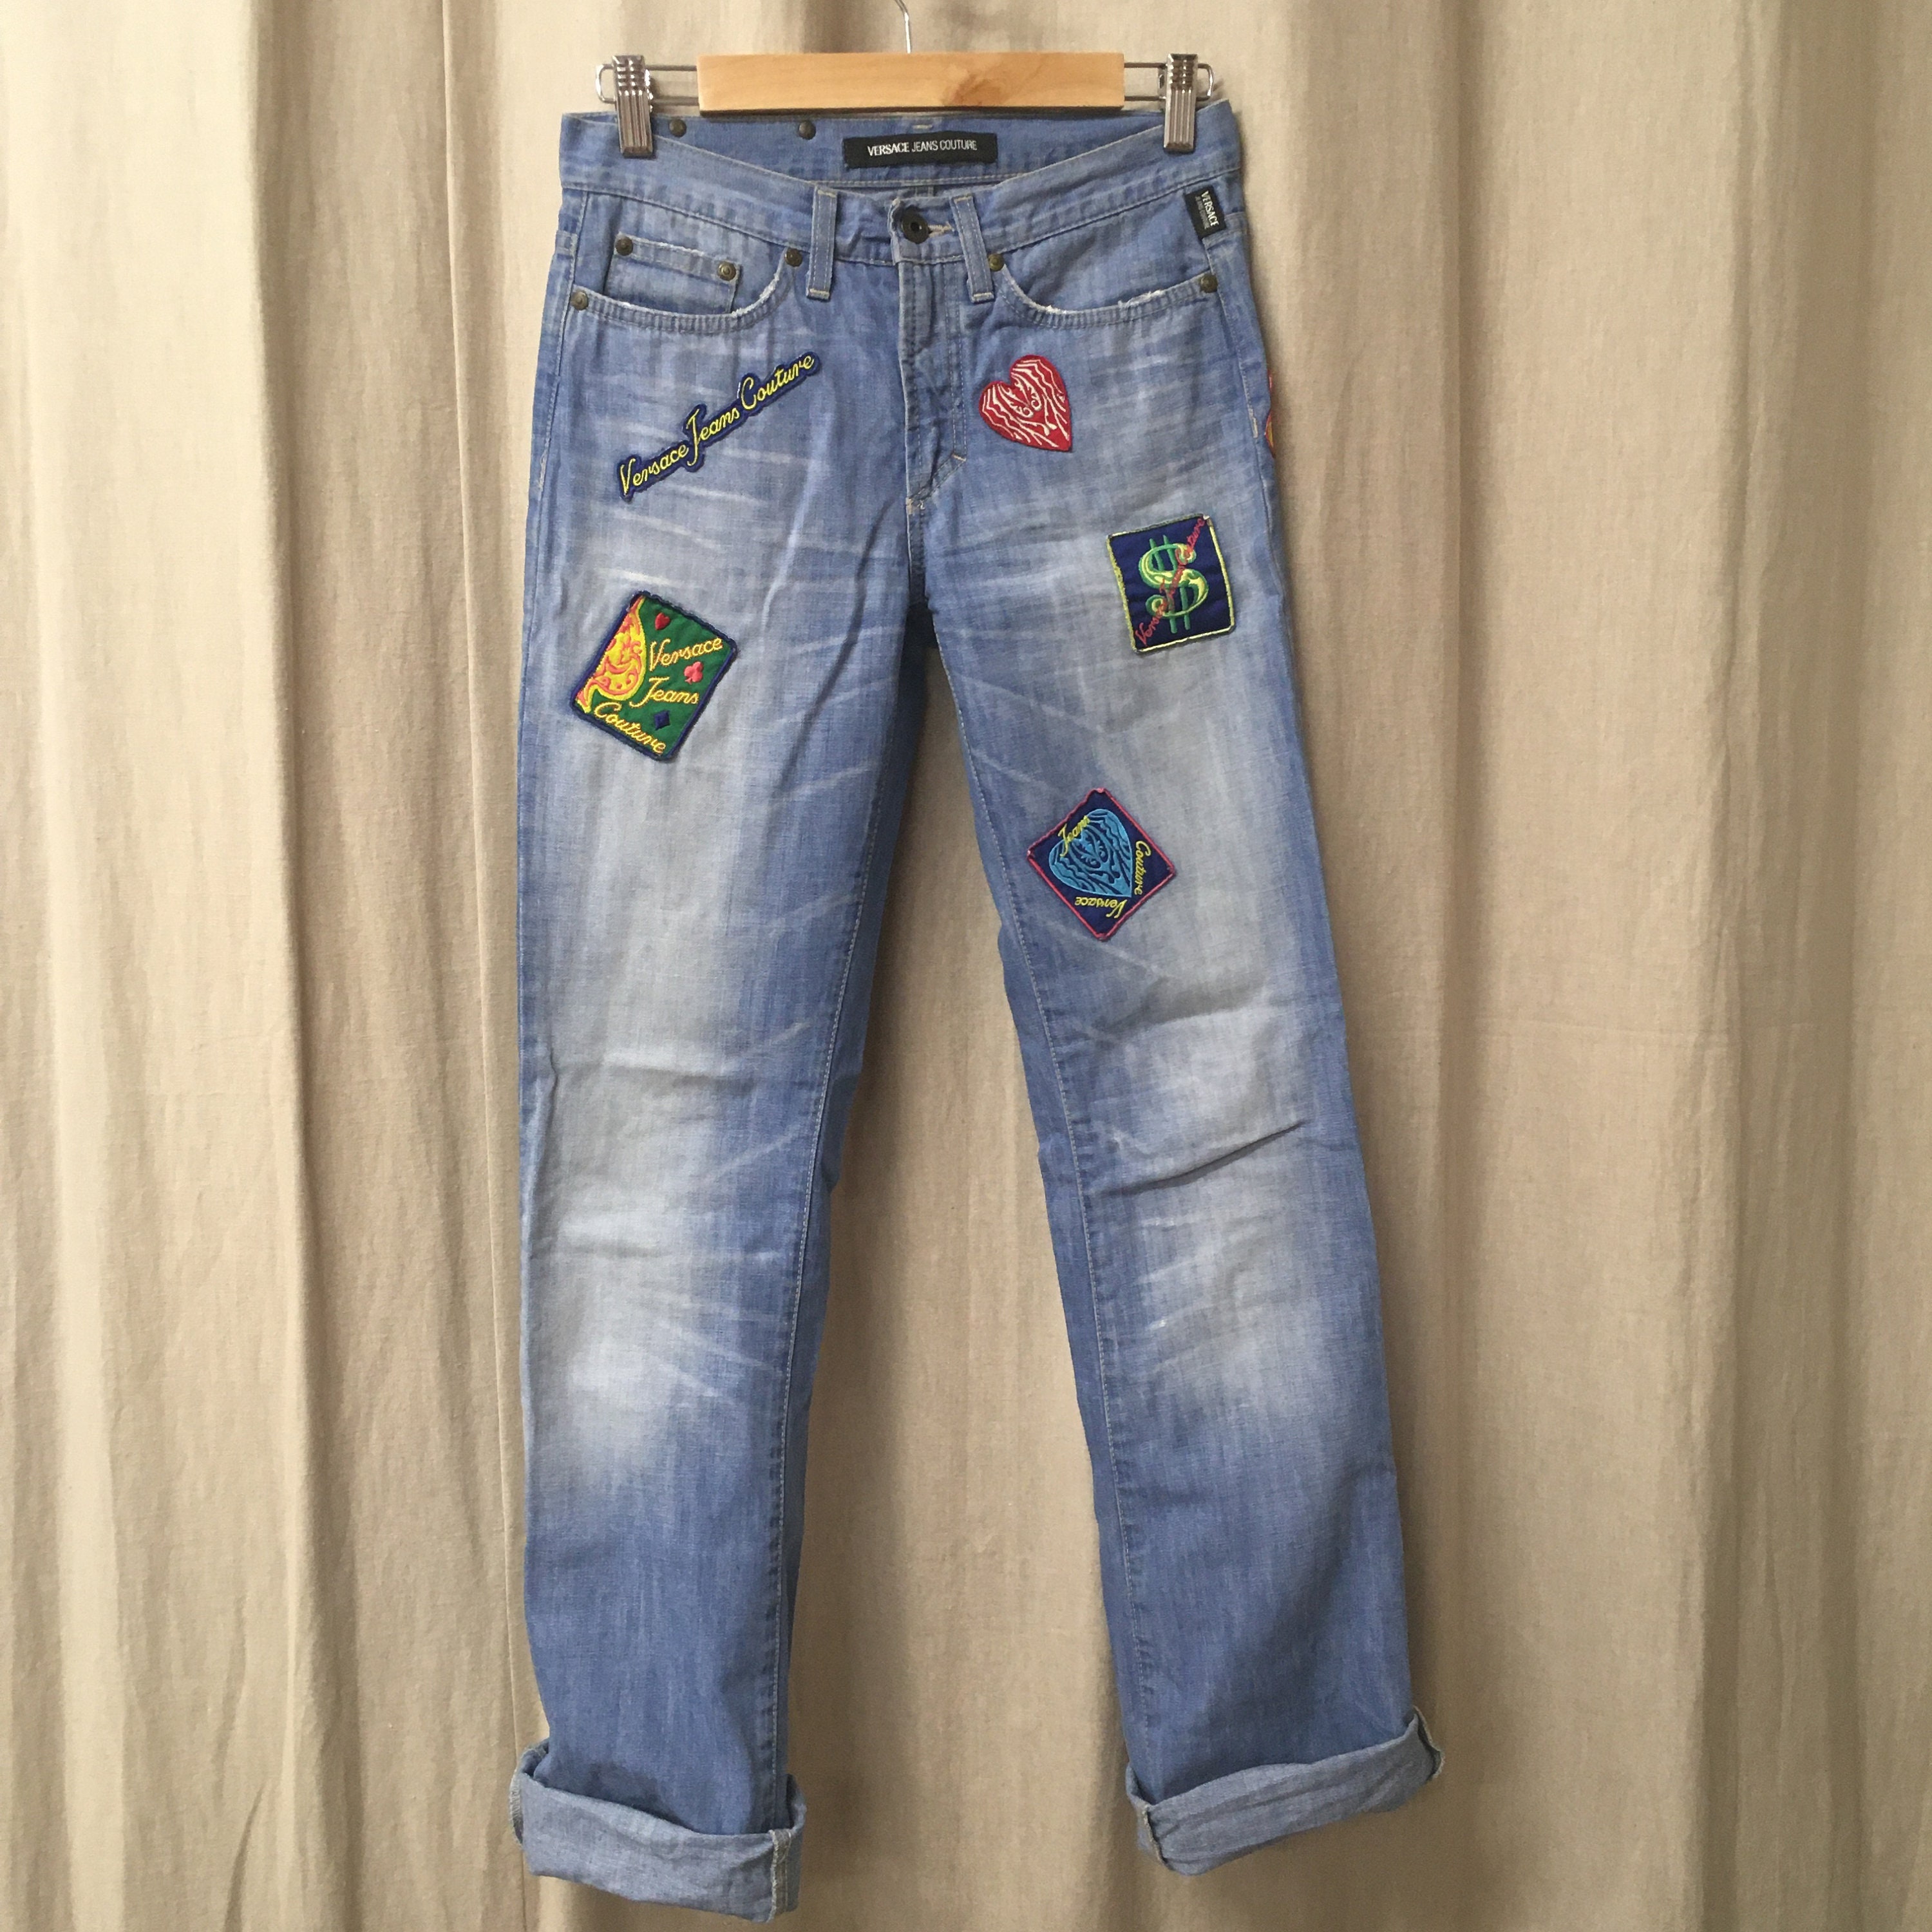 Vintage Versace Jeans Couture Denim Jeans Playing Card Theme